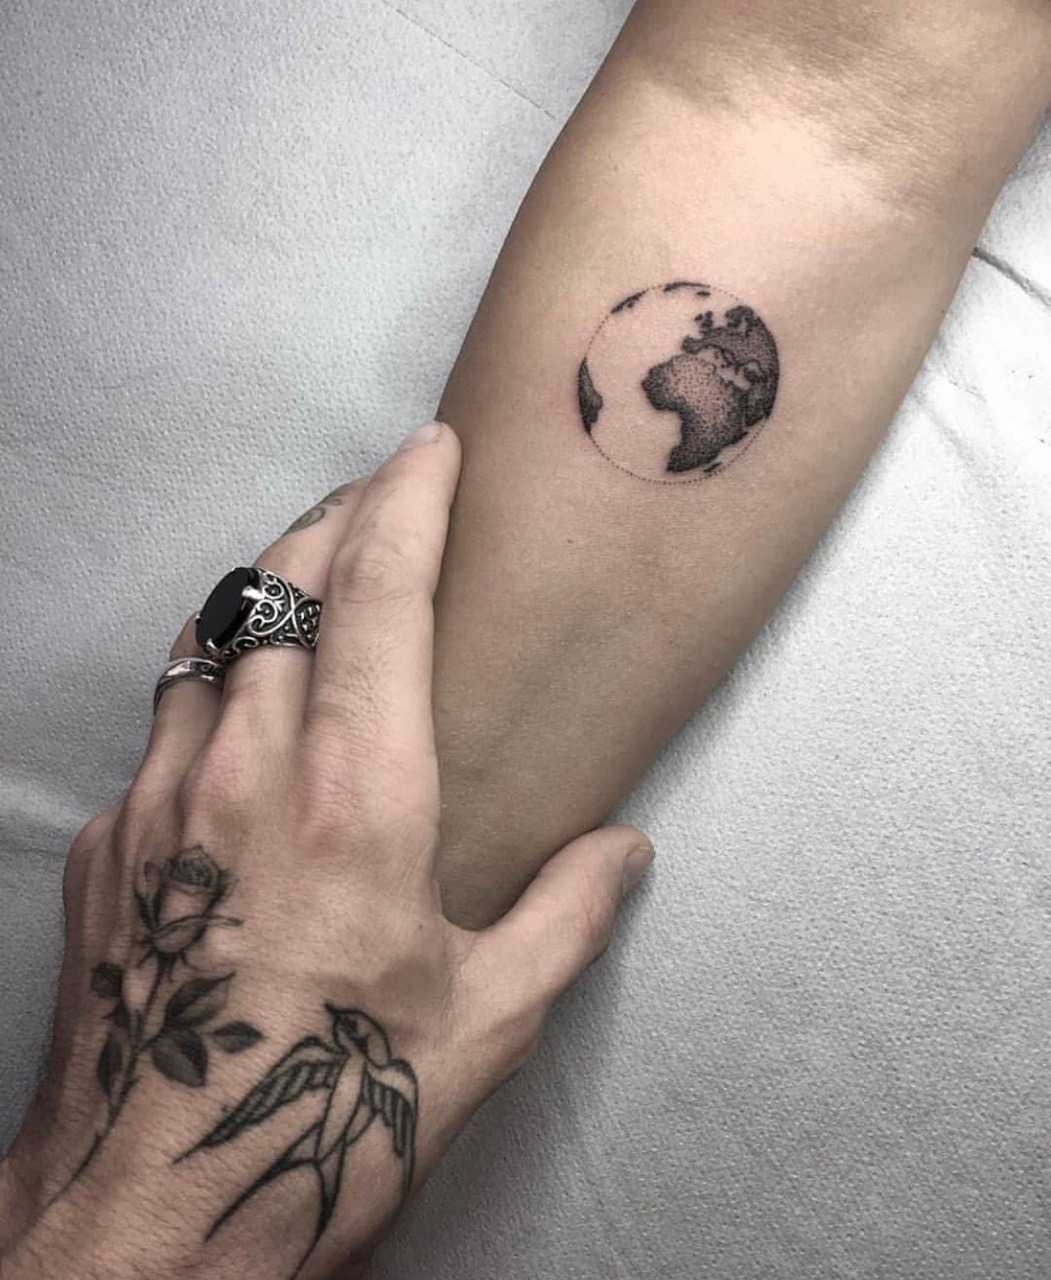 Small earth tattoo on the arm - Tattoogrid.net